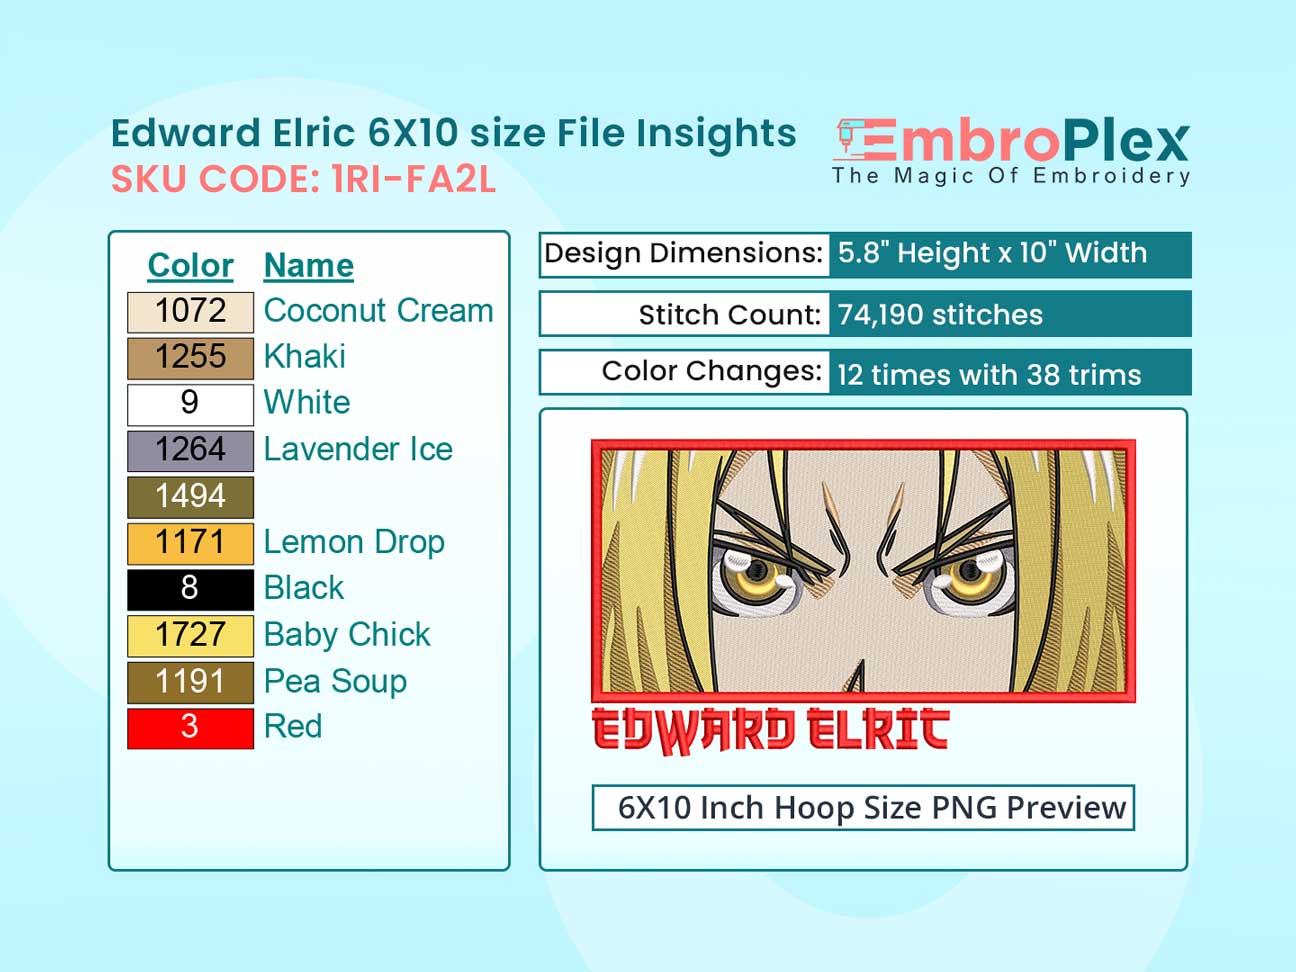 Anime-Inspired Edward Elric Embroidery Design File - 6x10 Inch hoop Size Variation overview image